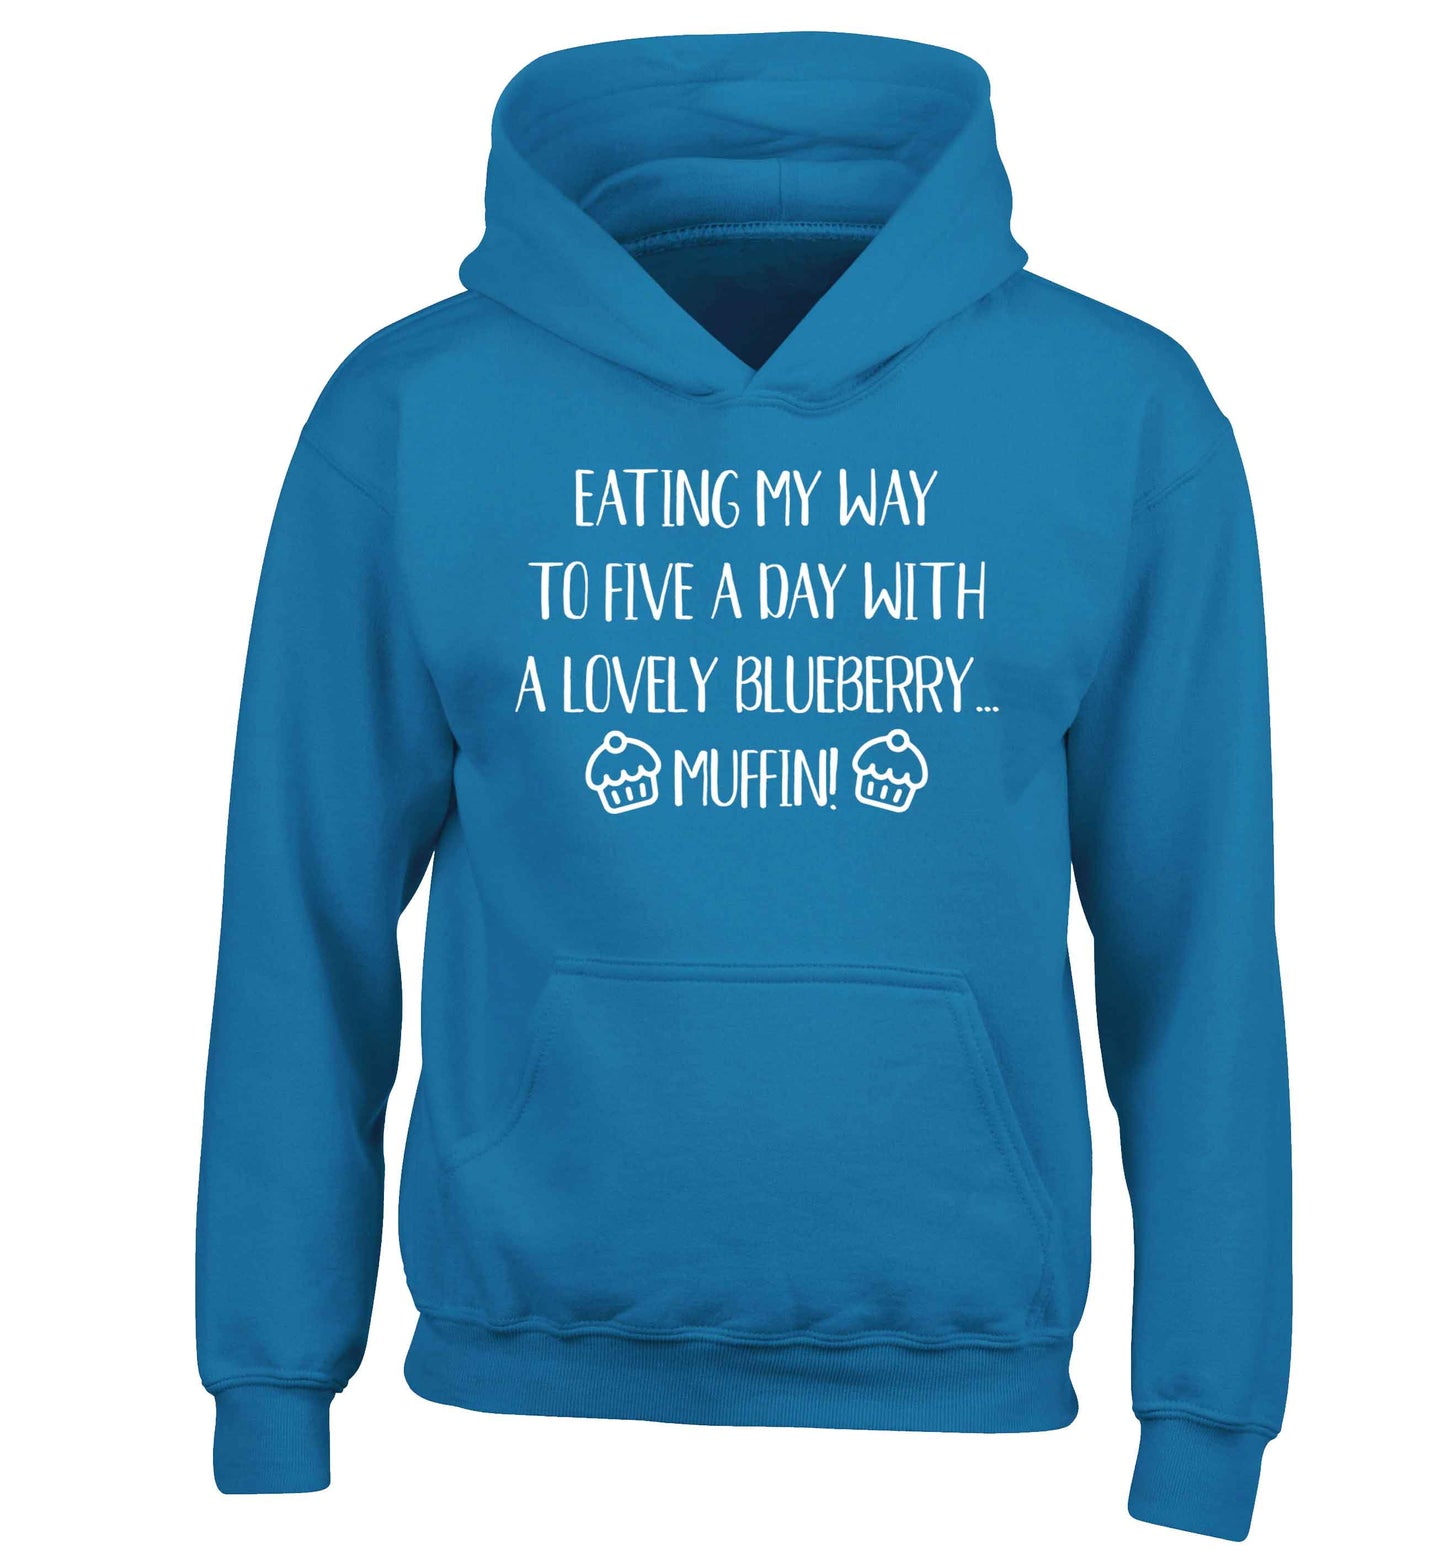 Eating my way to five a day with a lovely blueberry muffin children's blue hoodie 12-13 Years